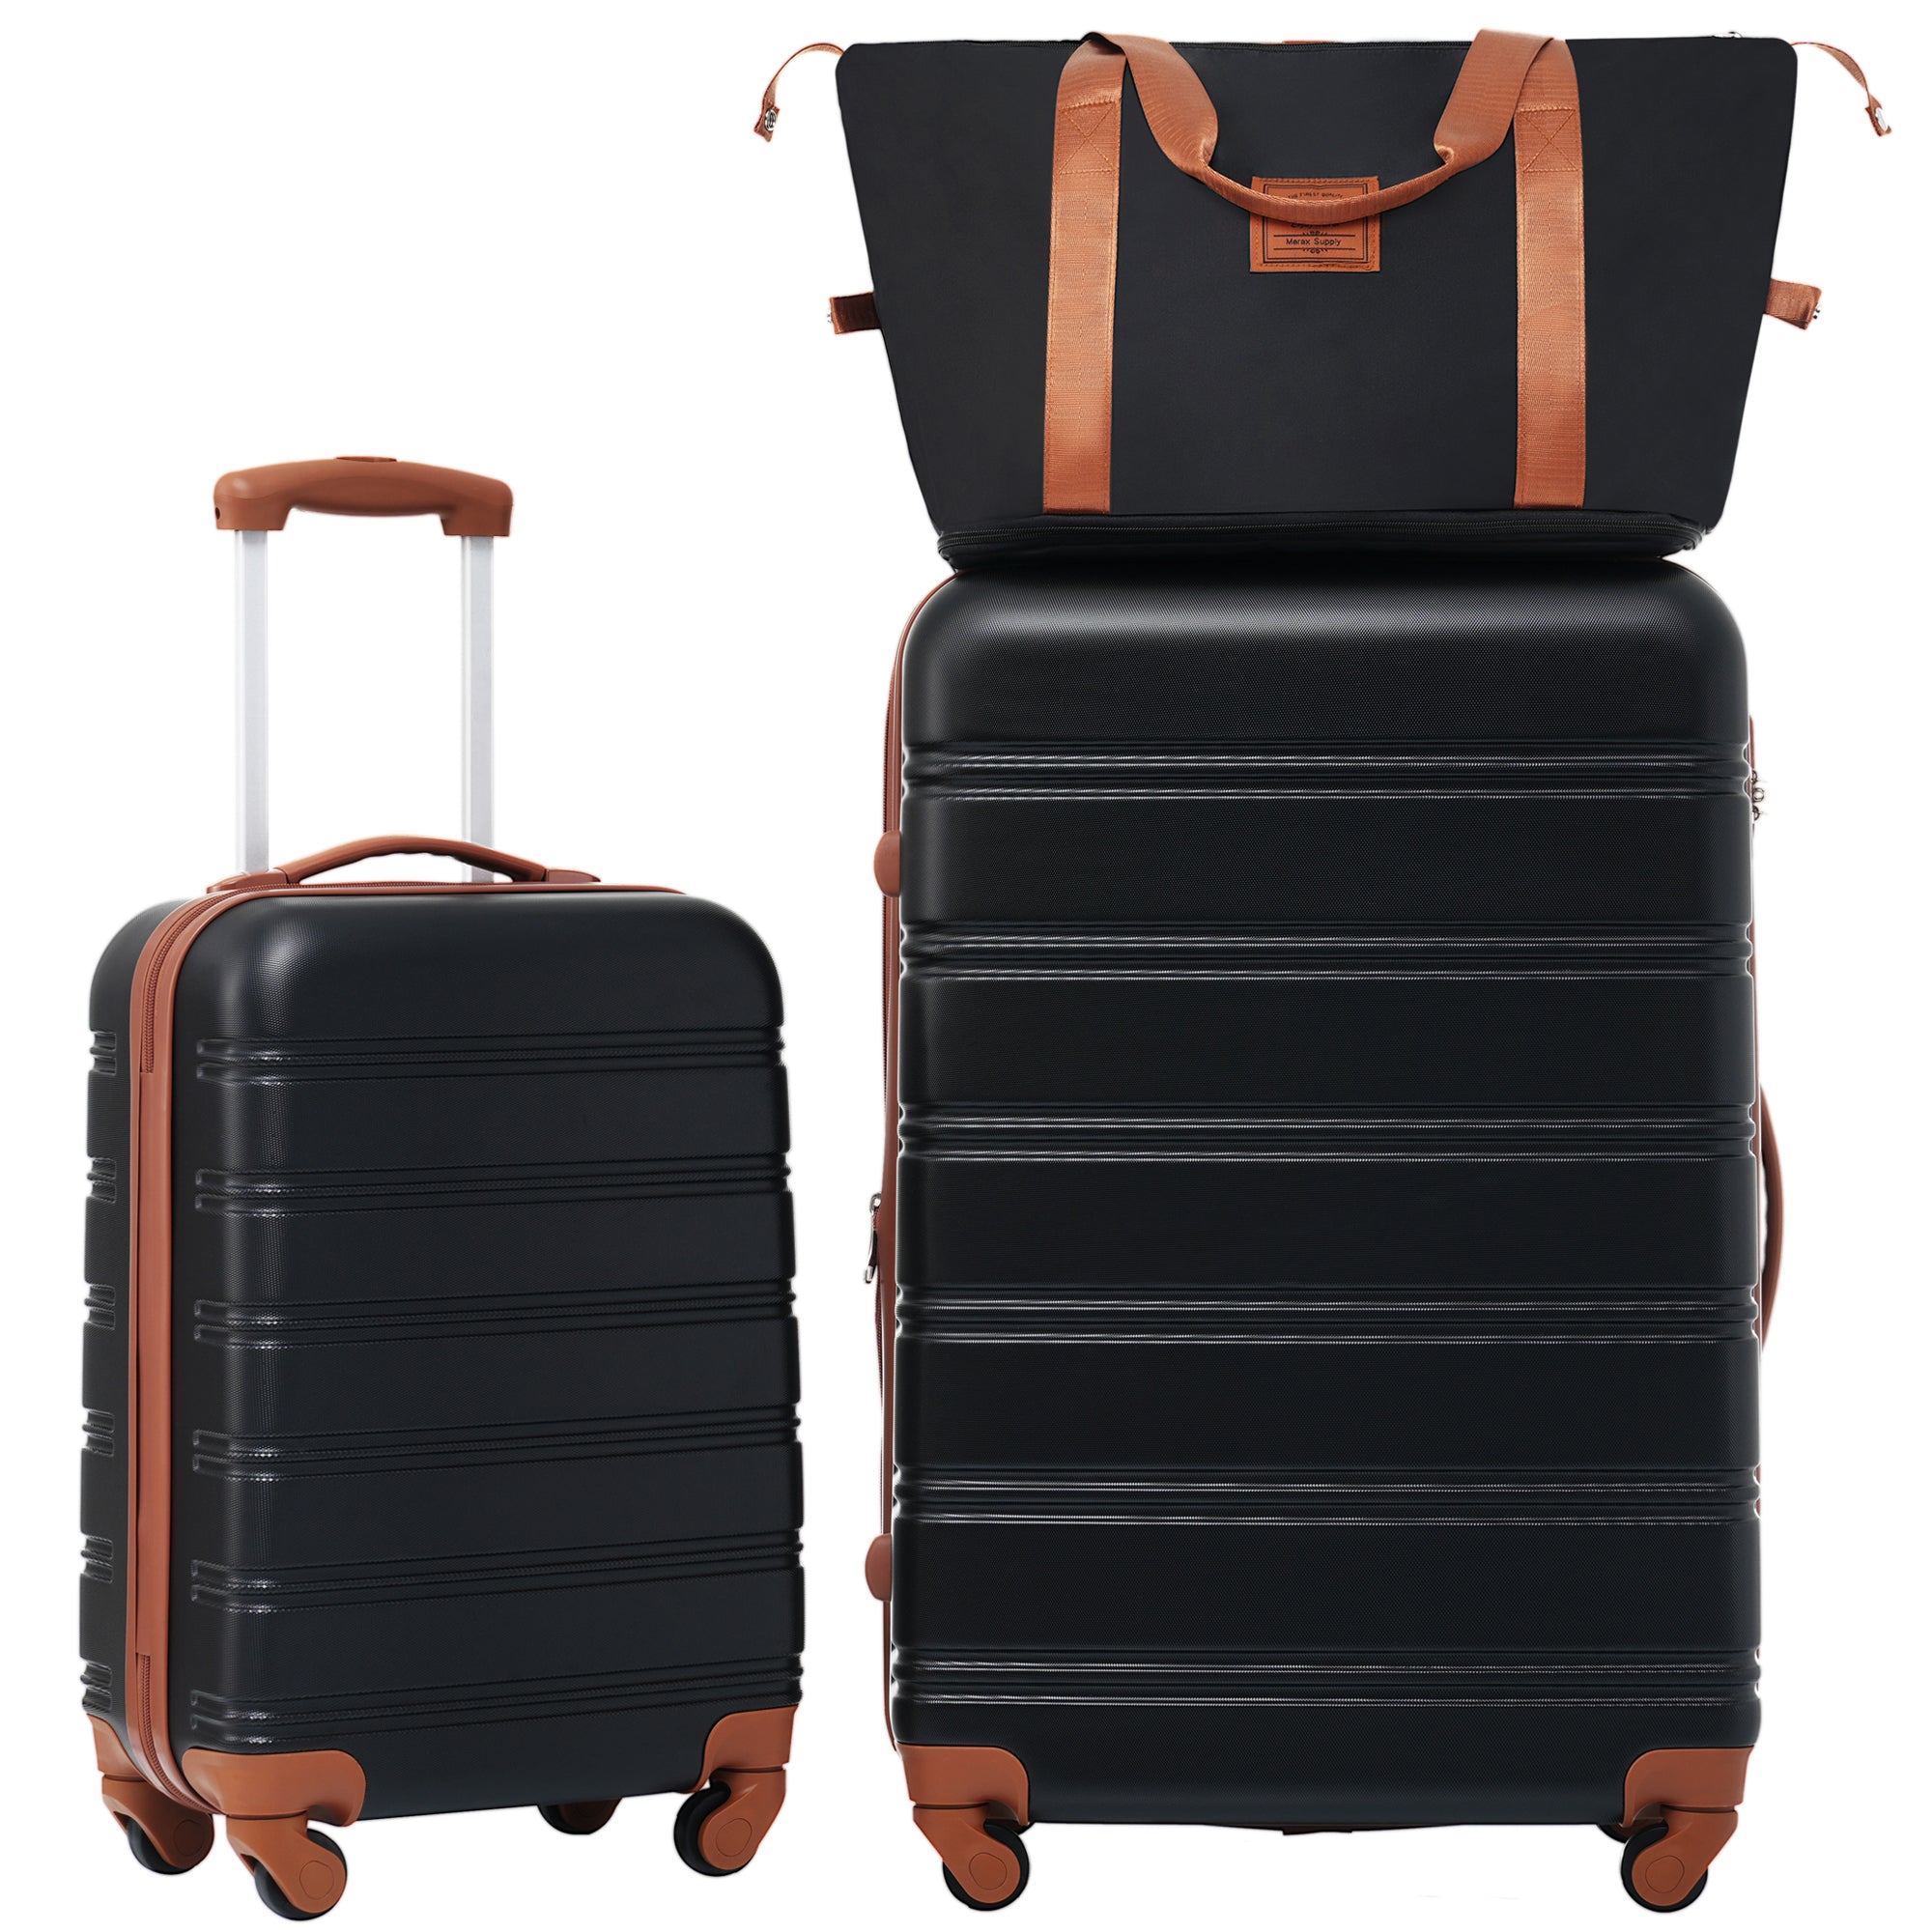 Hardshell Luggage Sets 2Pcs Bag Spinner Suitcase with black+brown-abs